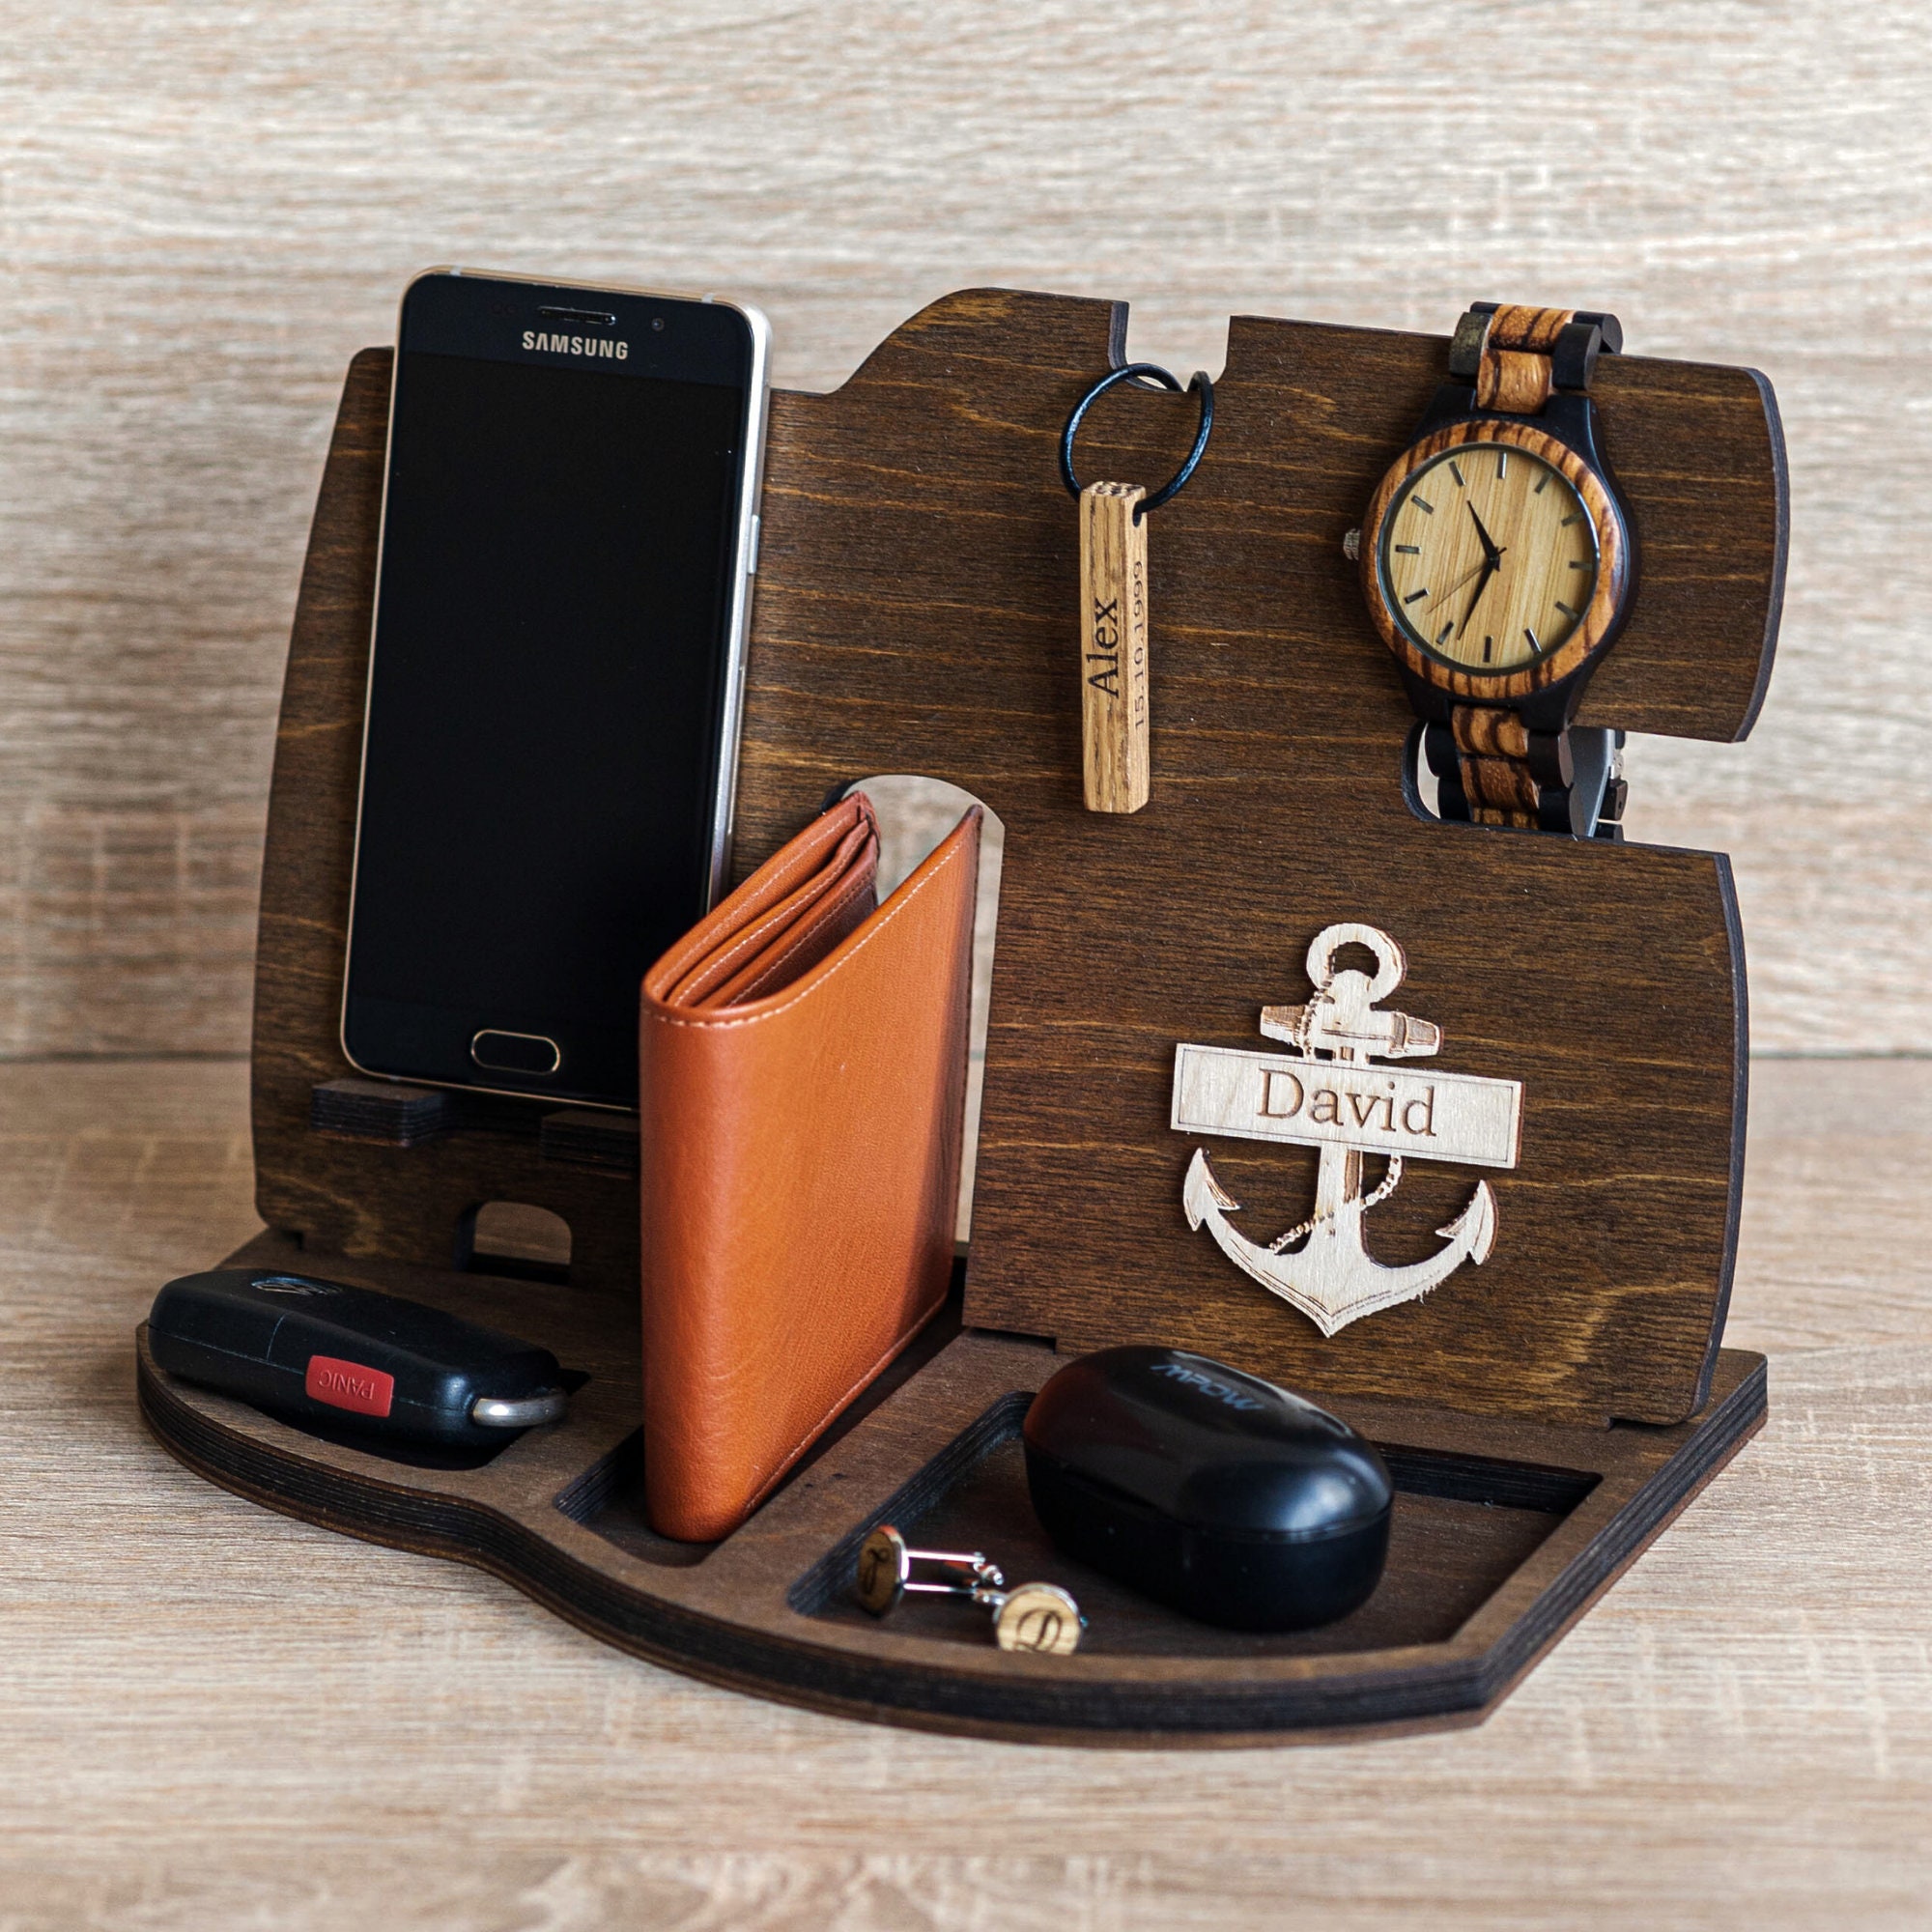 Accessories Gifts Decorations Gifts For Men Desk Decor For Men